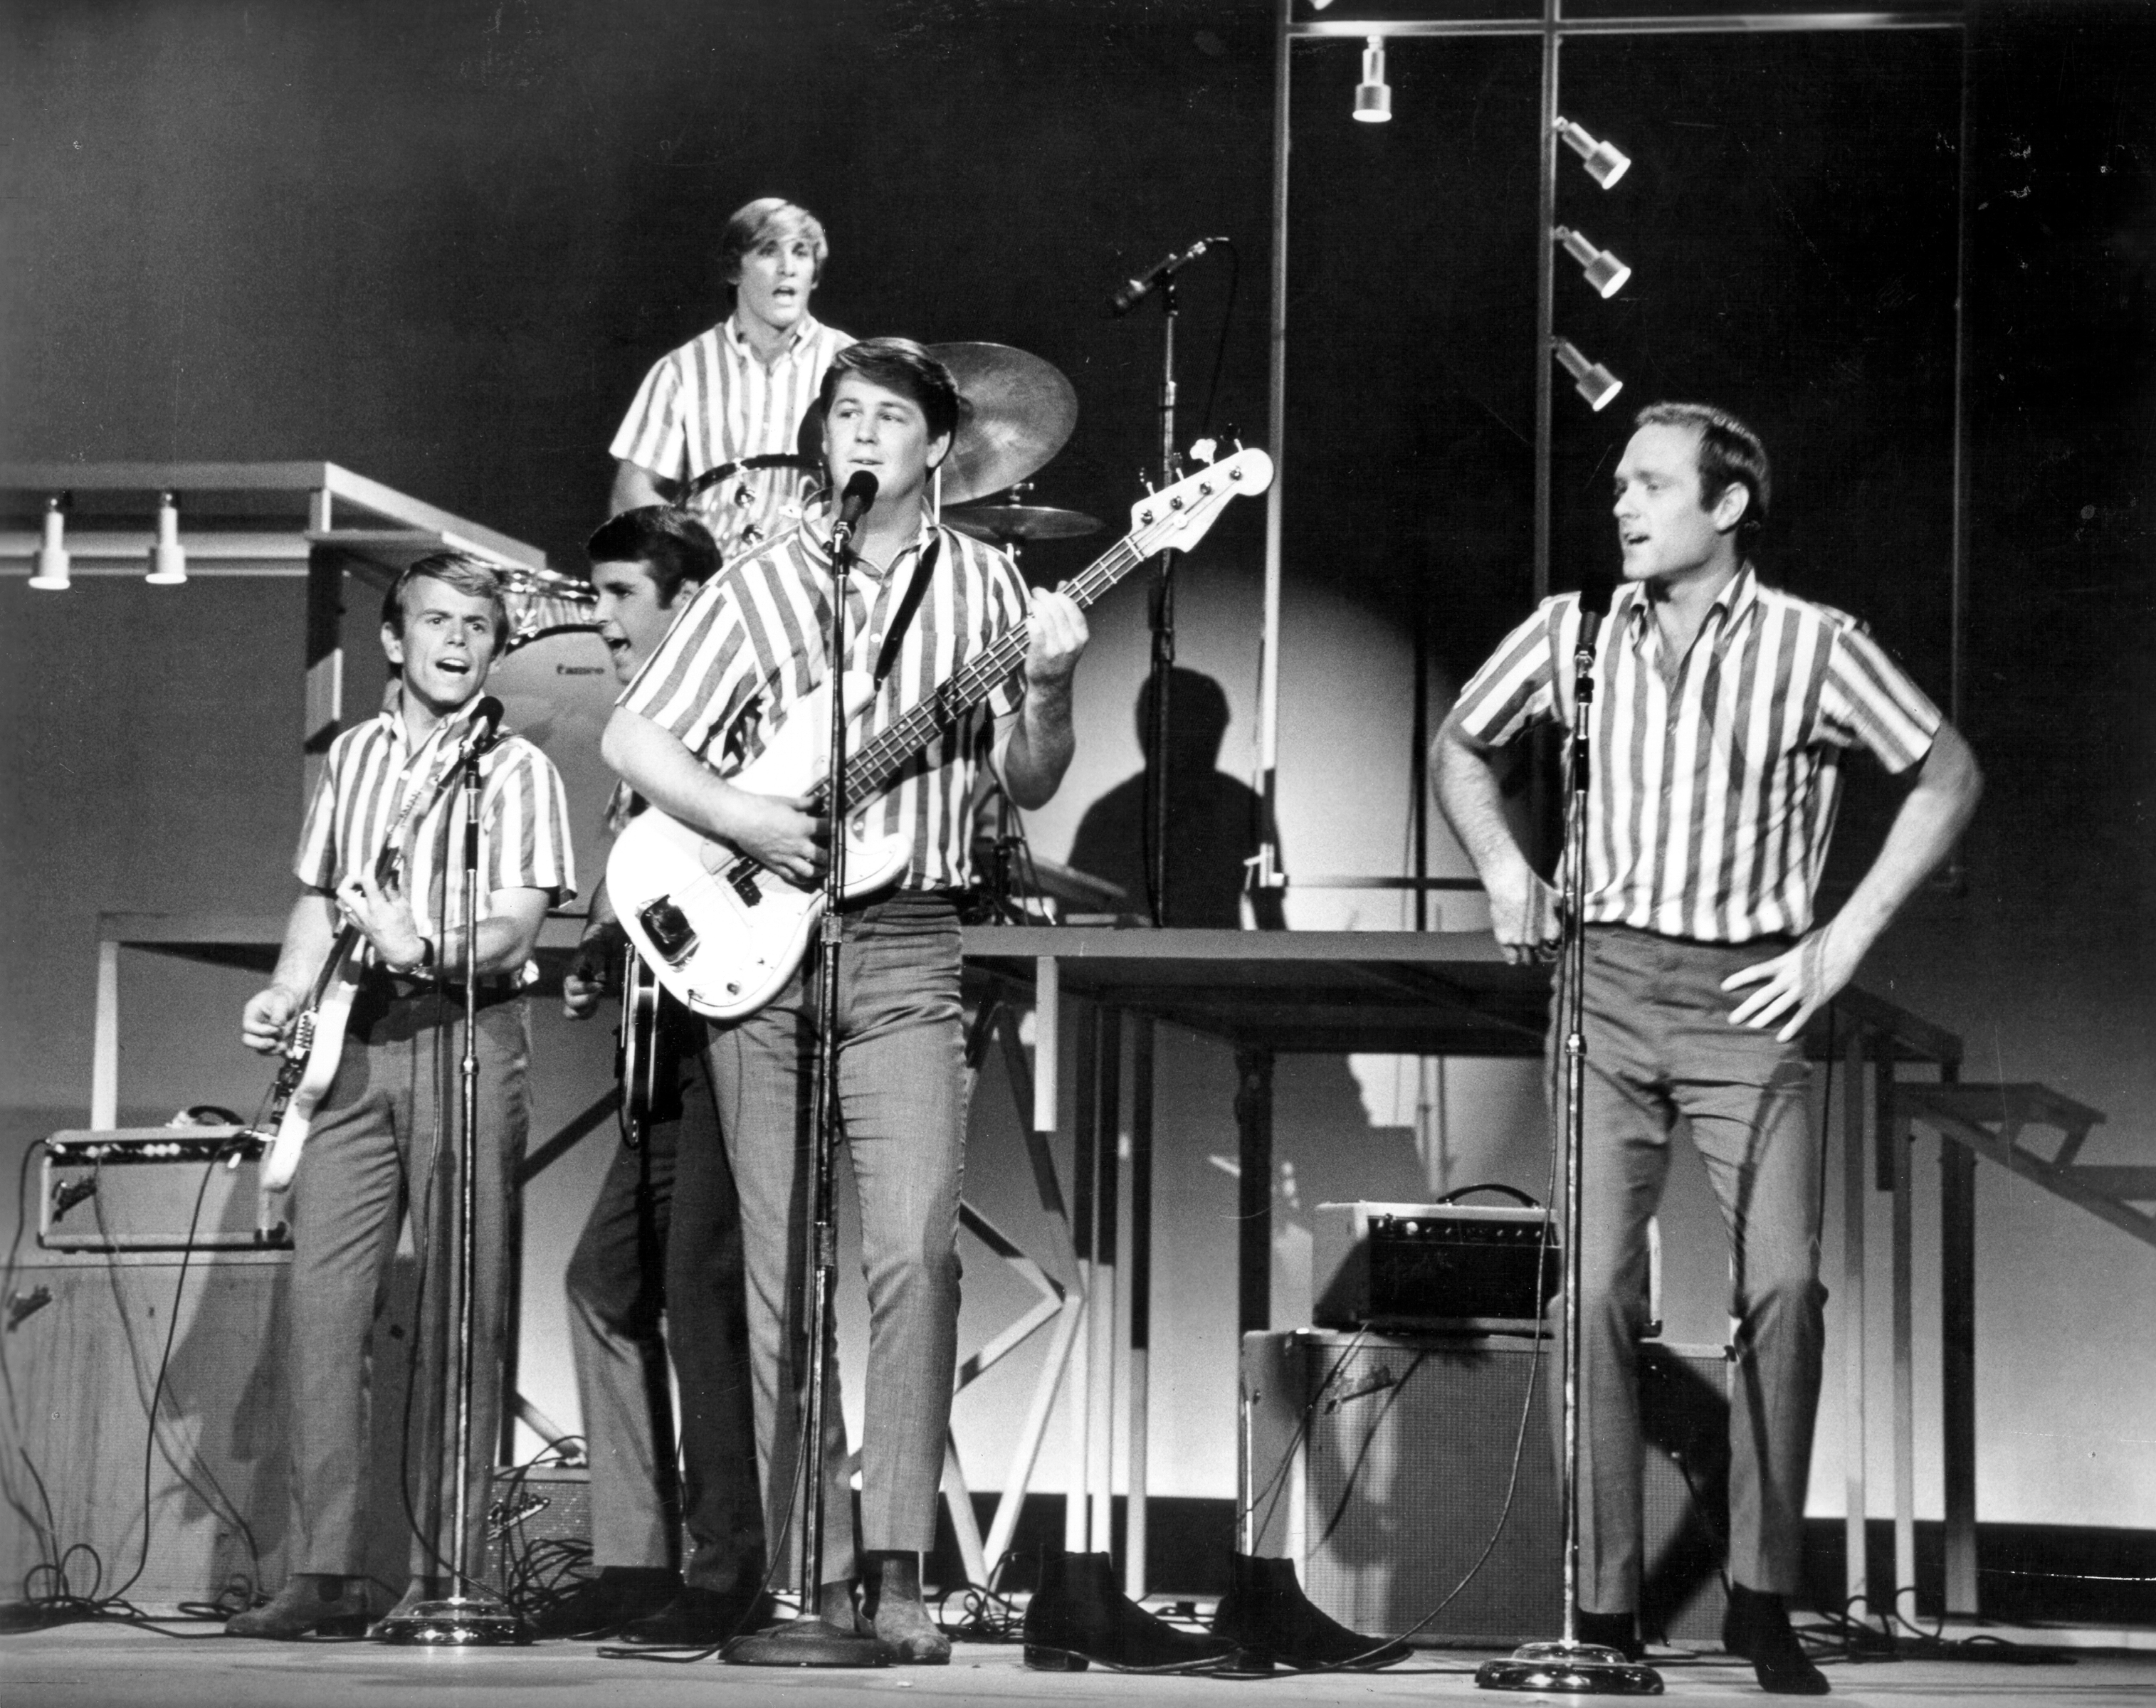 Rock and roll band The Beach Boys perform at the TAMI Show